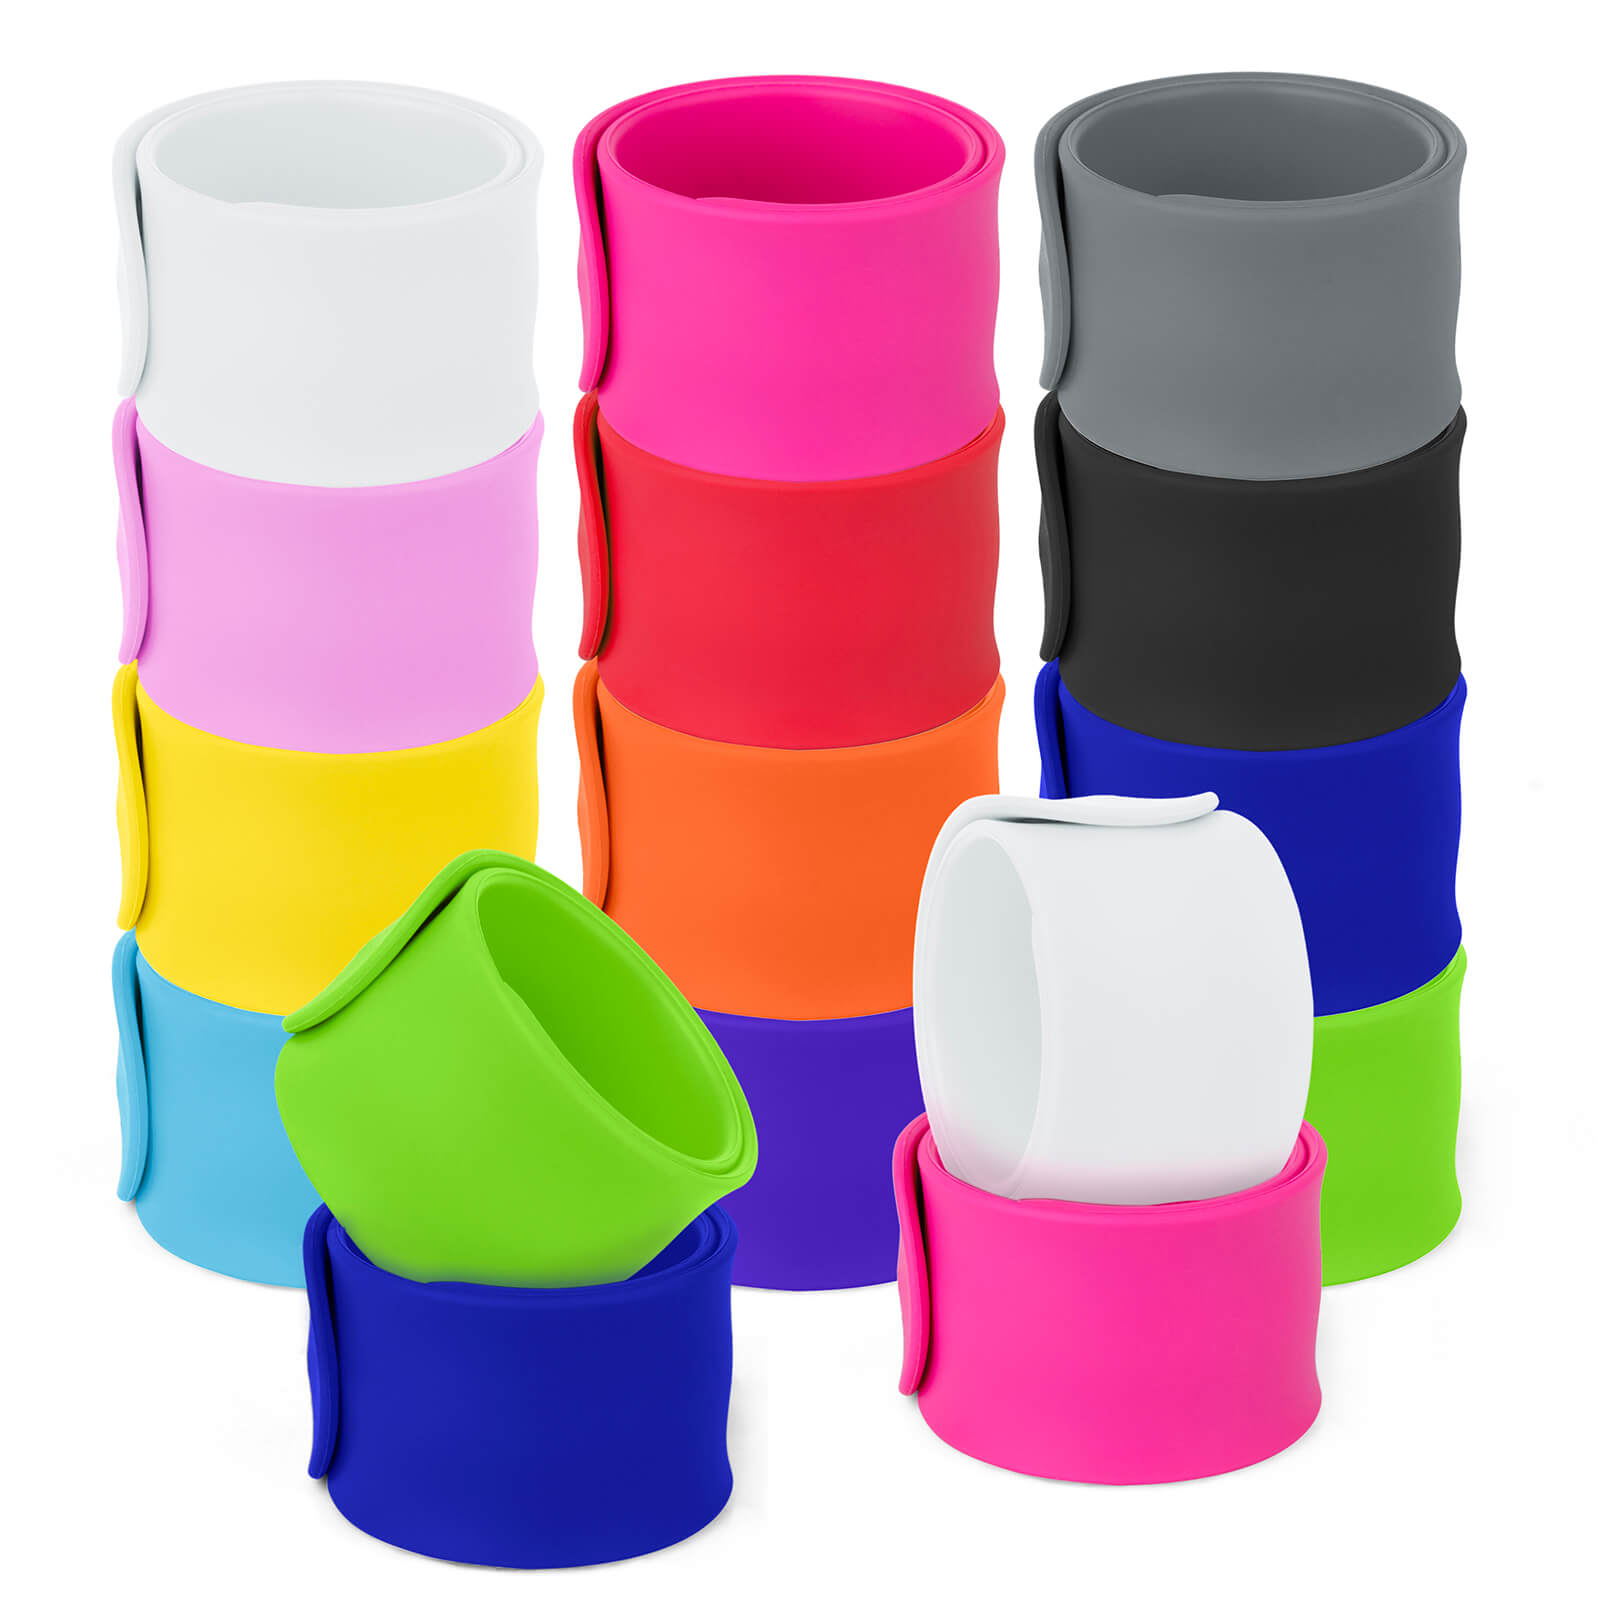 Personalized Silicone Slap Bracelets, Soft Rubber Wristband for Party Favors